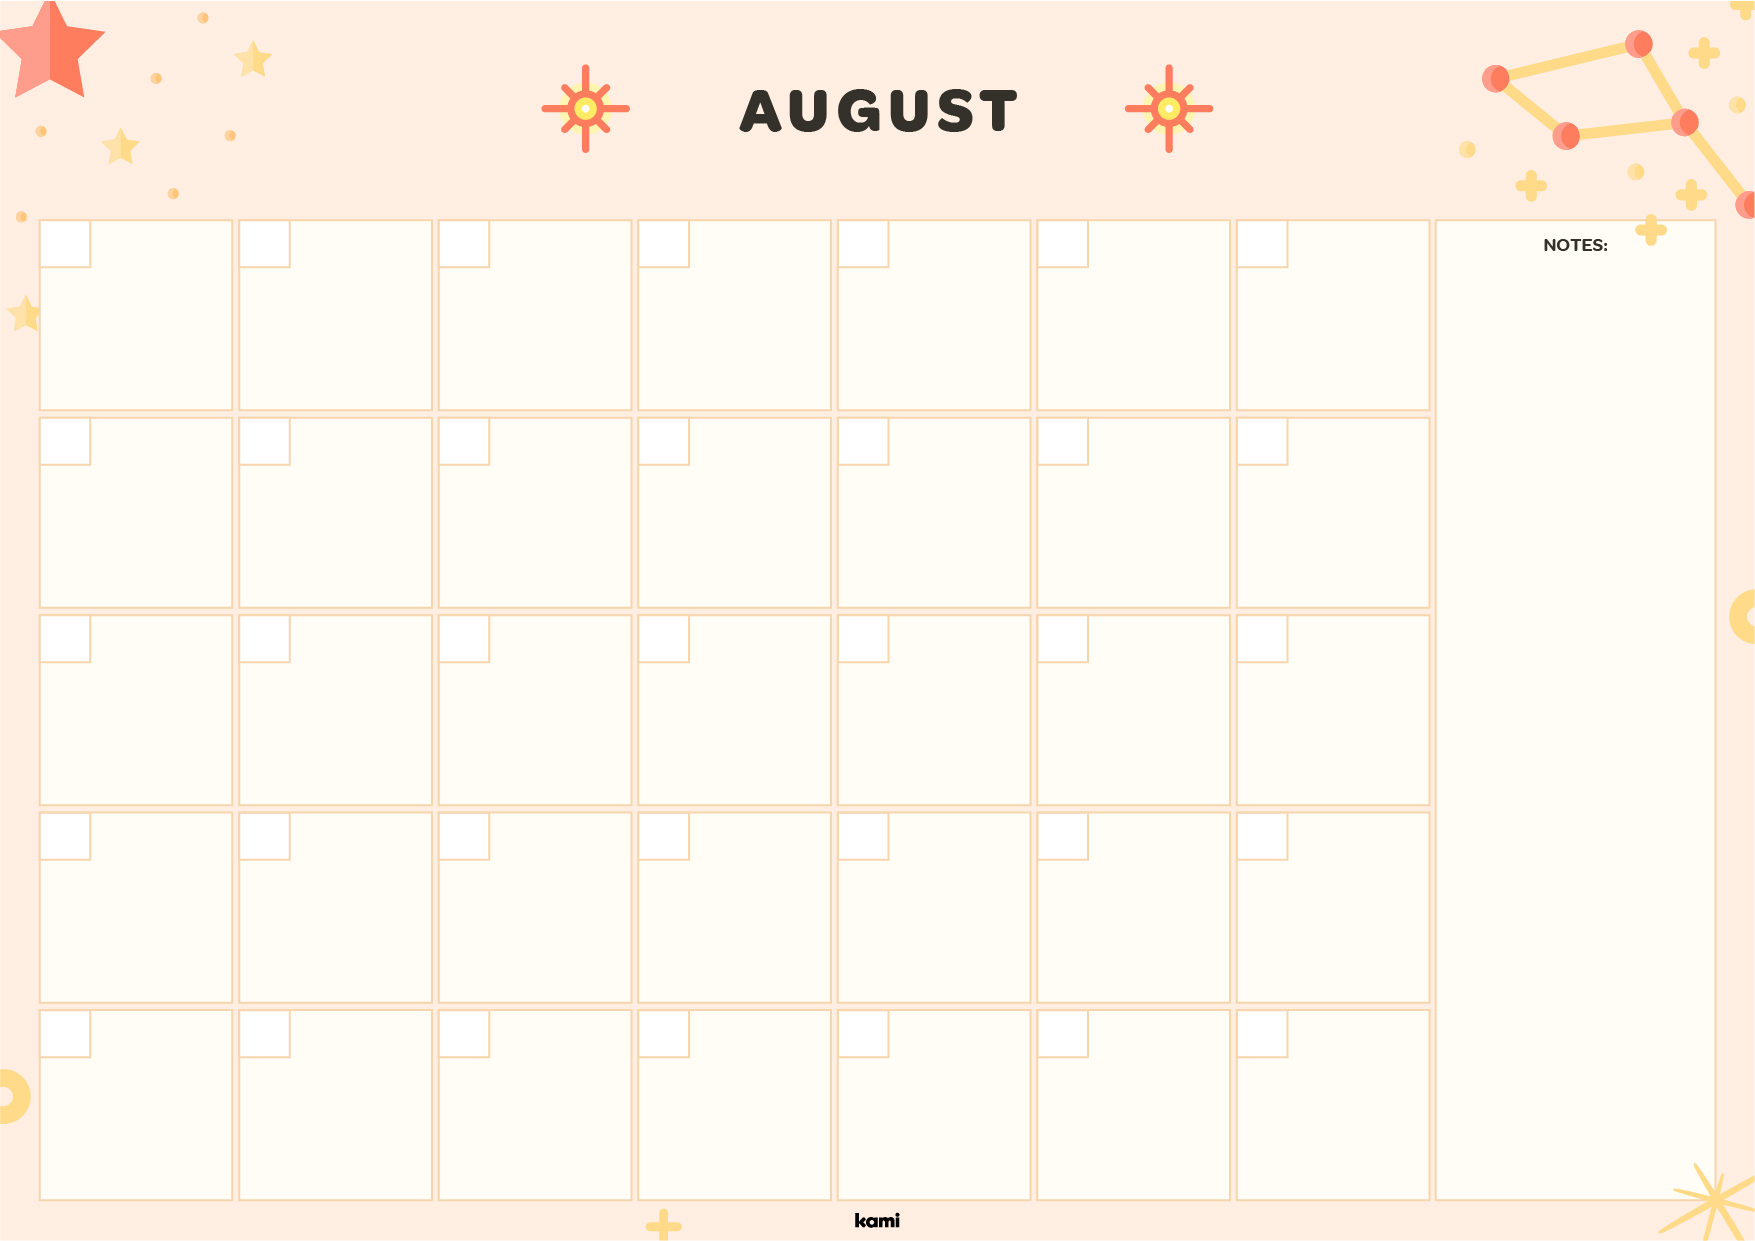 A calendar pack for back to school with a stars design.